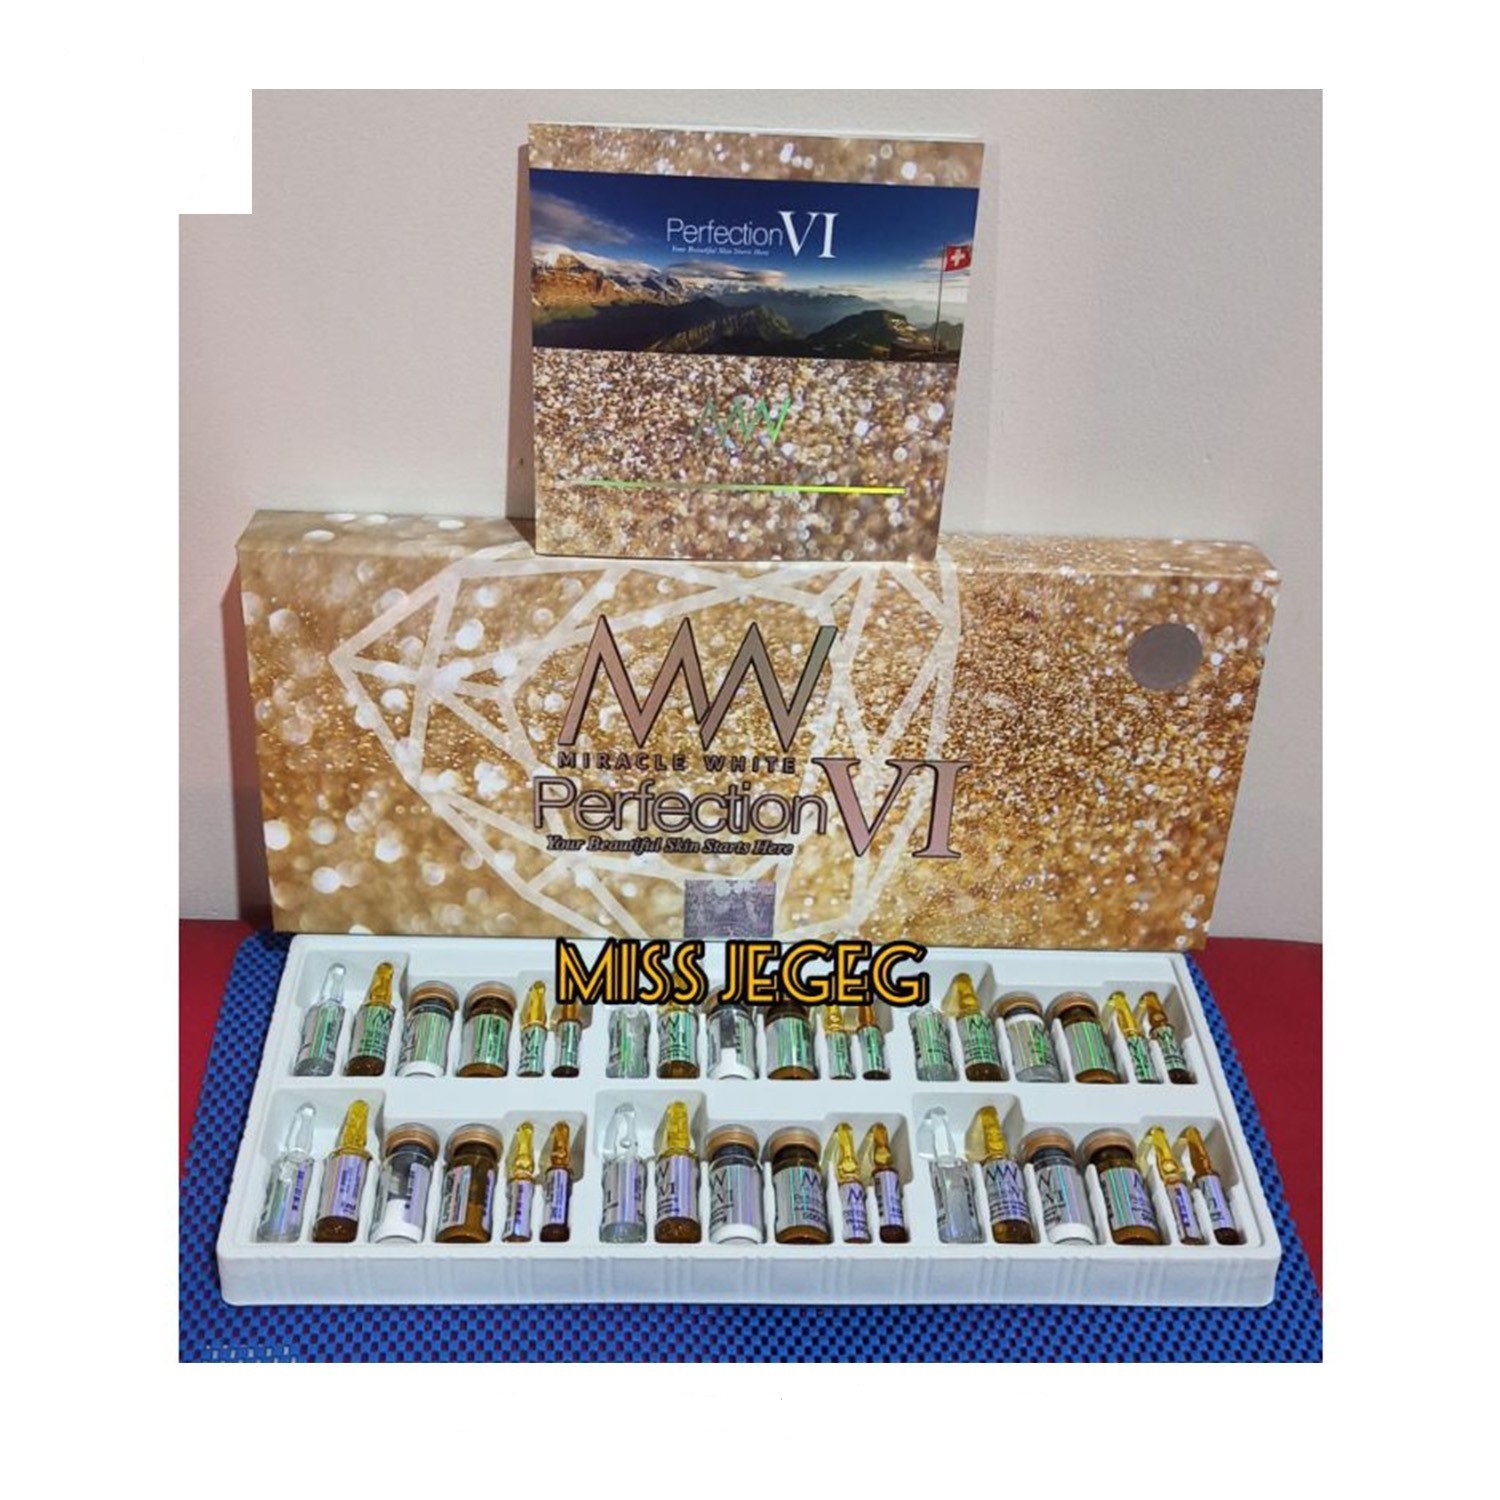 Miracle White Gold Perfection VI Glutathione 60000mg